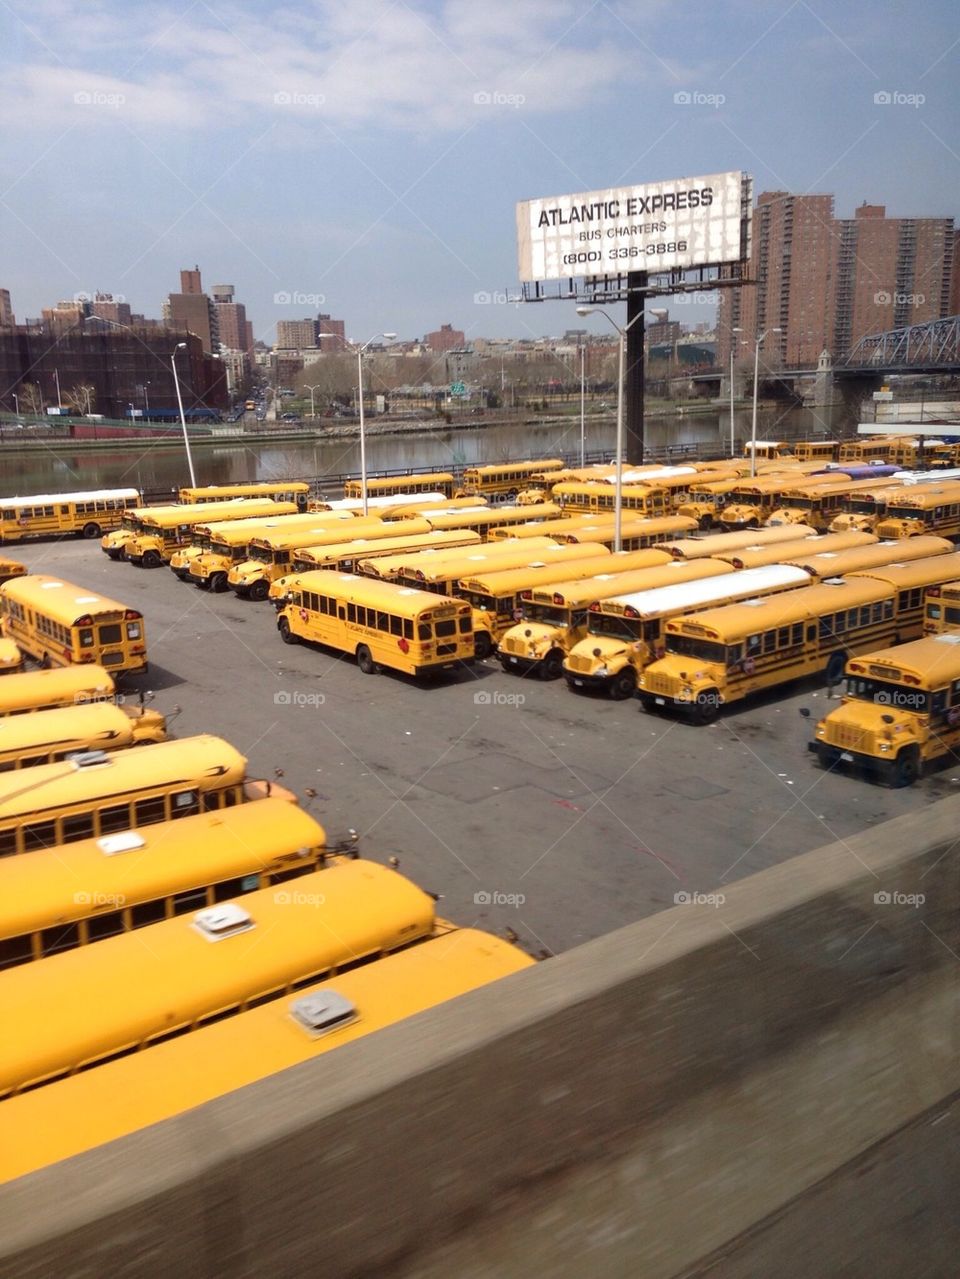 Busses Busses Everywhere